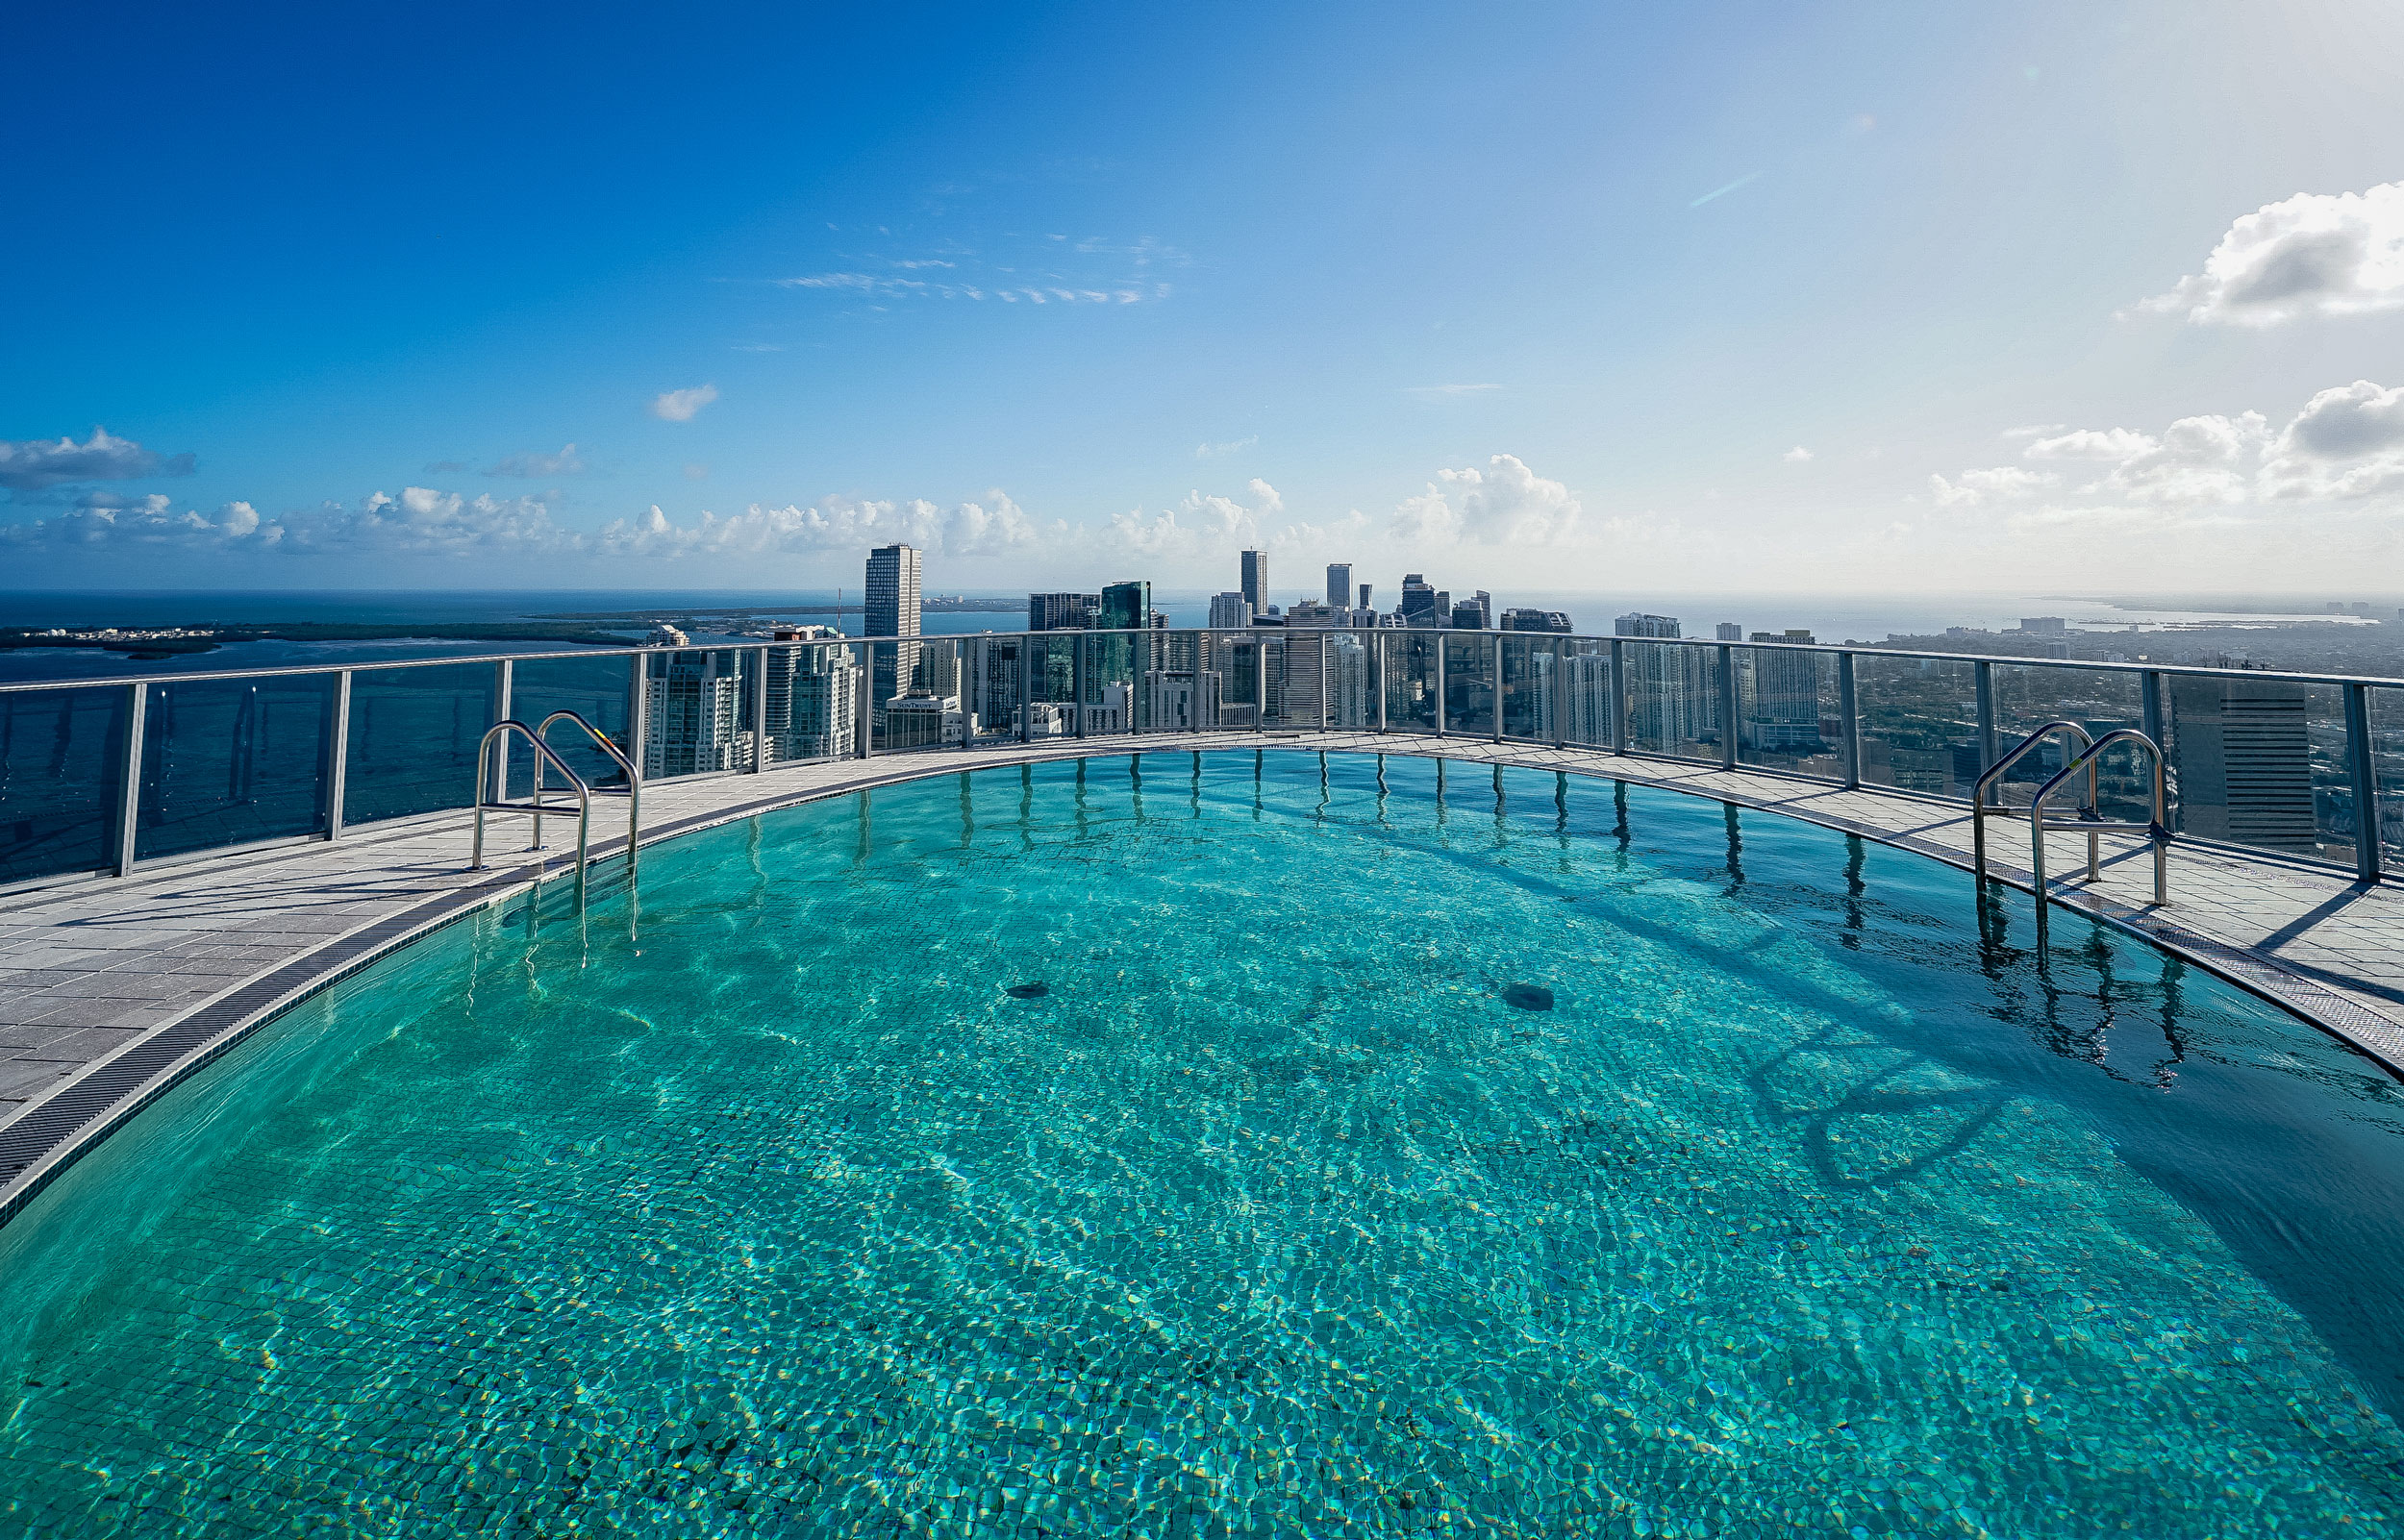 View over the rooftop pool of the Miami skyline from The Paramount at Miami Worldcenter